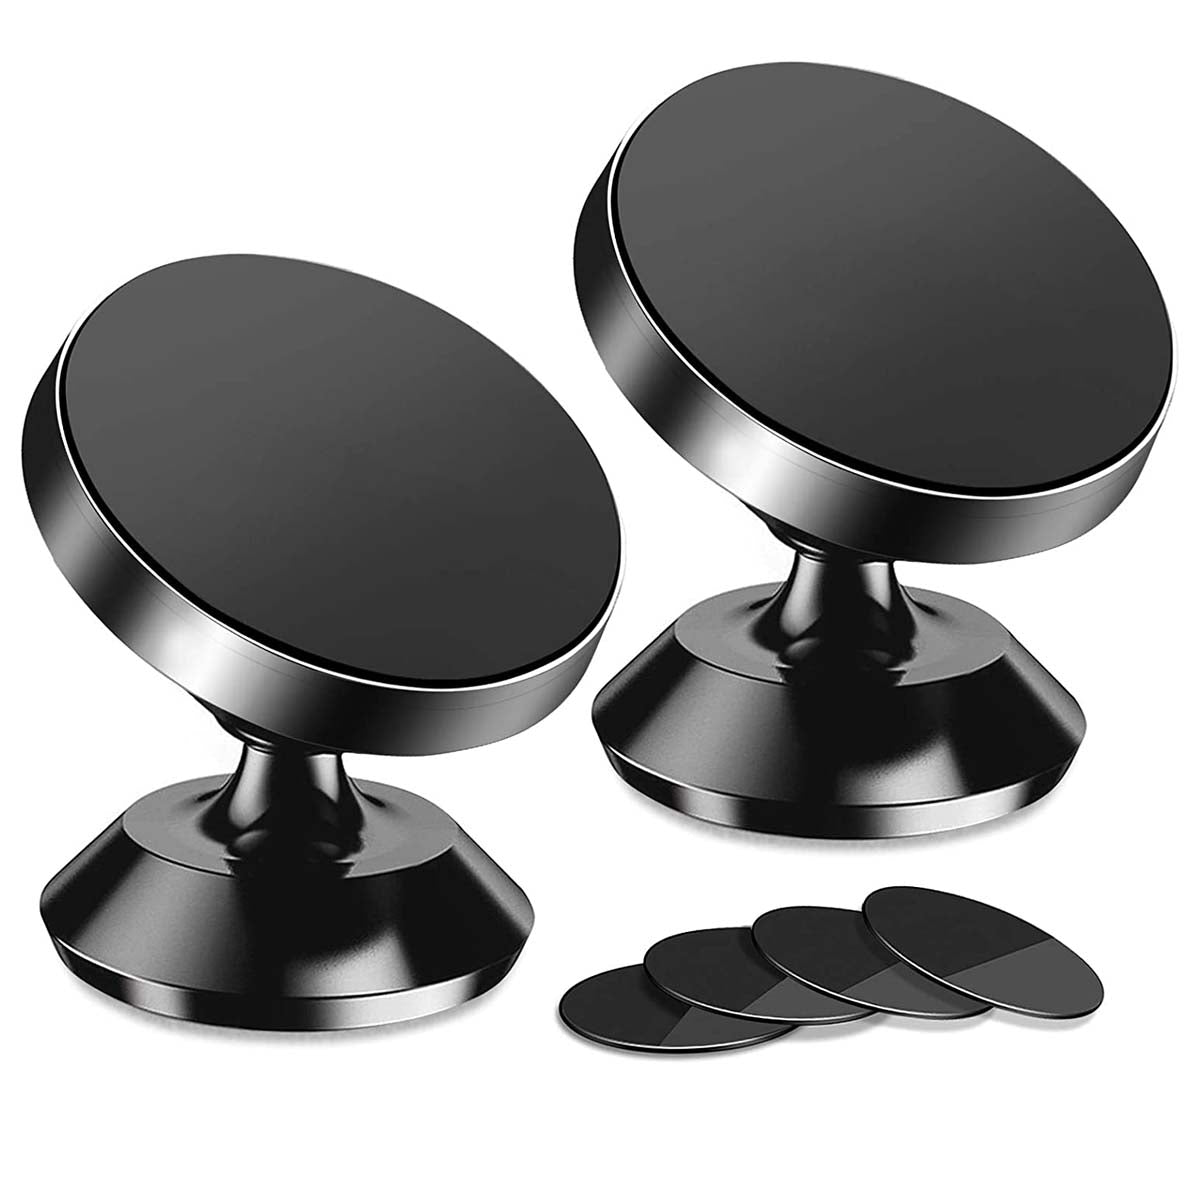 [2 Pack ] Magnetic Phone Mount, Custom For Cars, [ Super Strong Magnet ] [ with 4 Metal Plate ] car Magnetic Phone Holder, [ 360° Rotation ] Universal Dashboard car Mount Fits All Cell Phones, Car Accessories FD13982